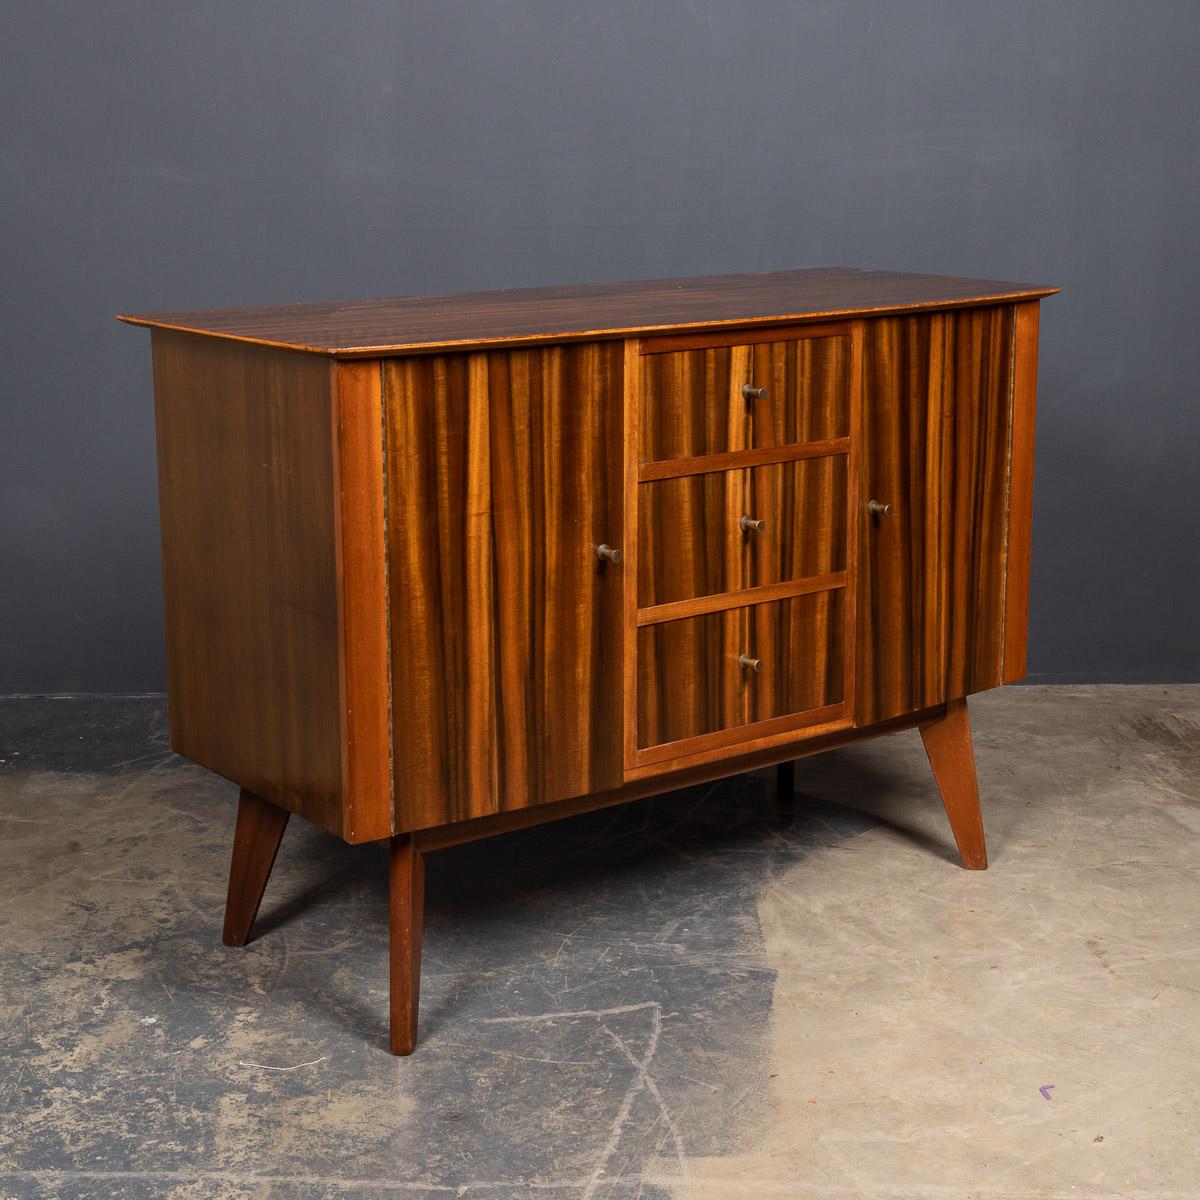 Stylish mid-20th century unusual 'Zebra wood' two door, three drawer sideboard from the Morris of Glasgow, designed by Neil Morris and is from the Cambrae Range, which won awards at the 1950 Ideal Home Exhibition. Veneered in a beautiful and unusual